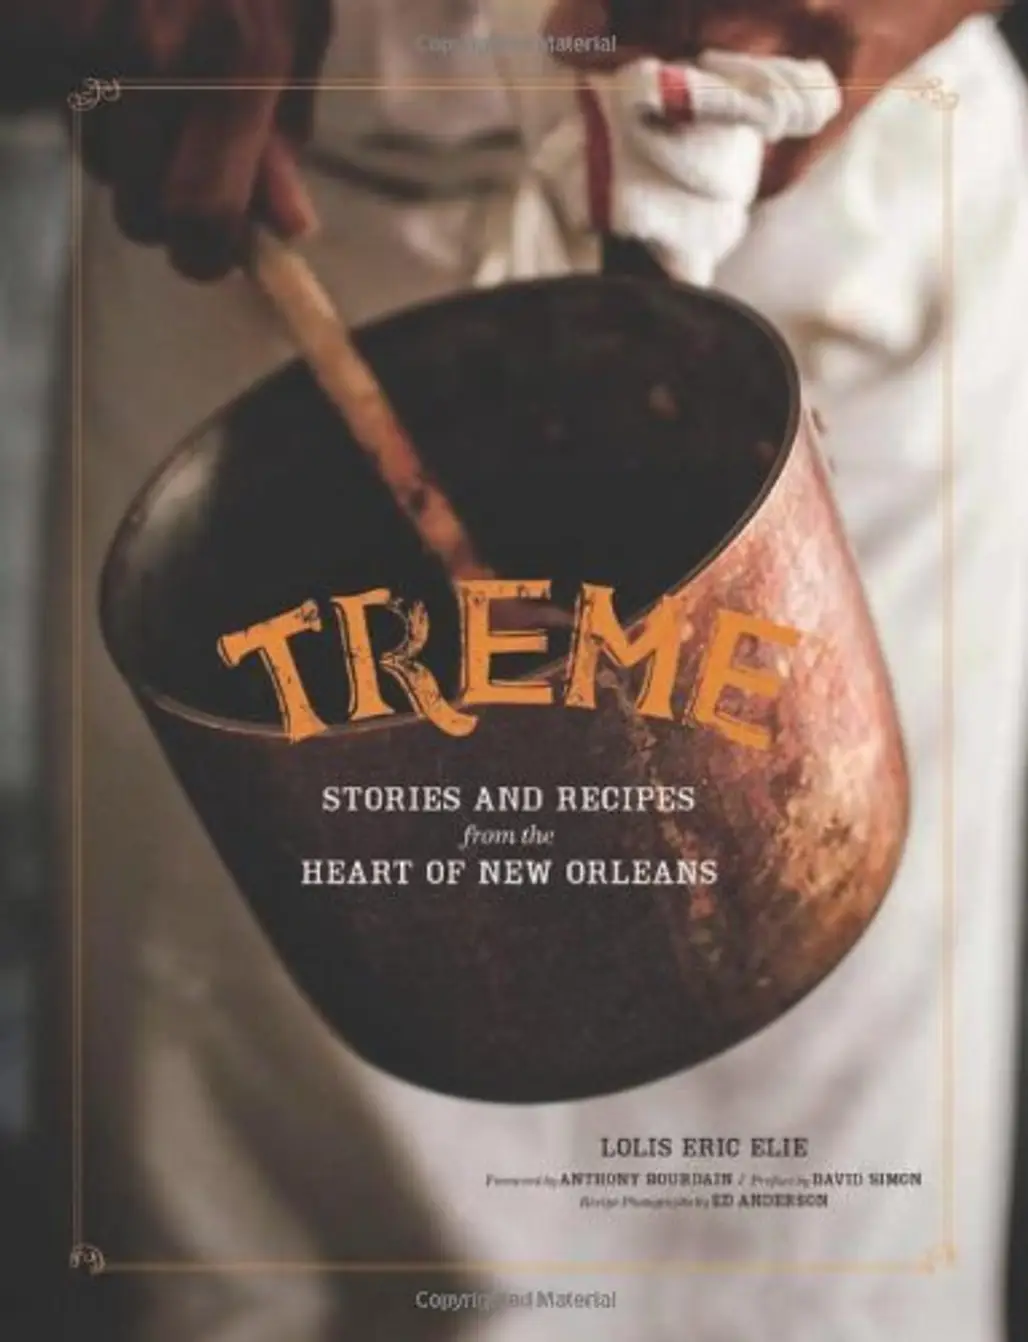 Treme: Stories and Recipes